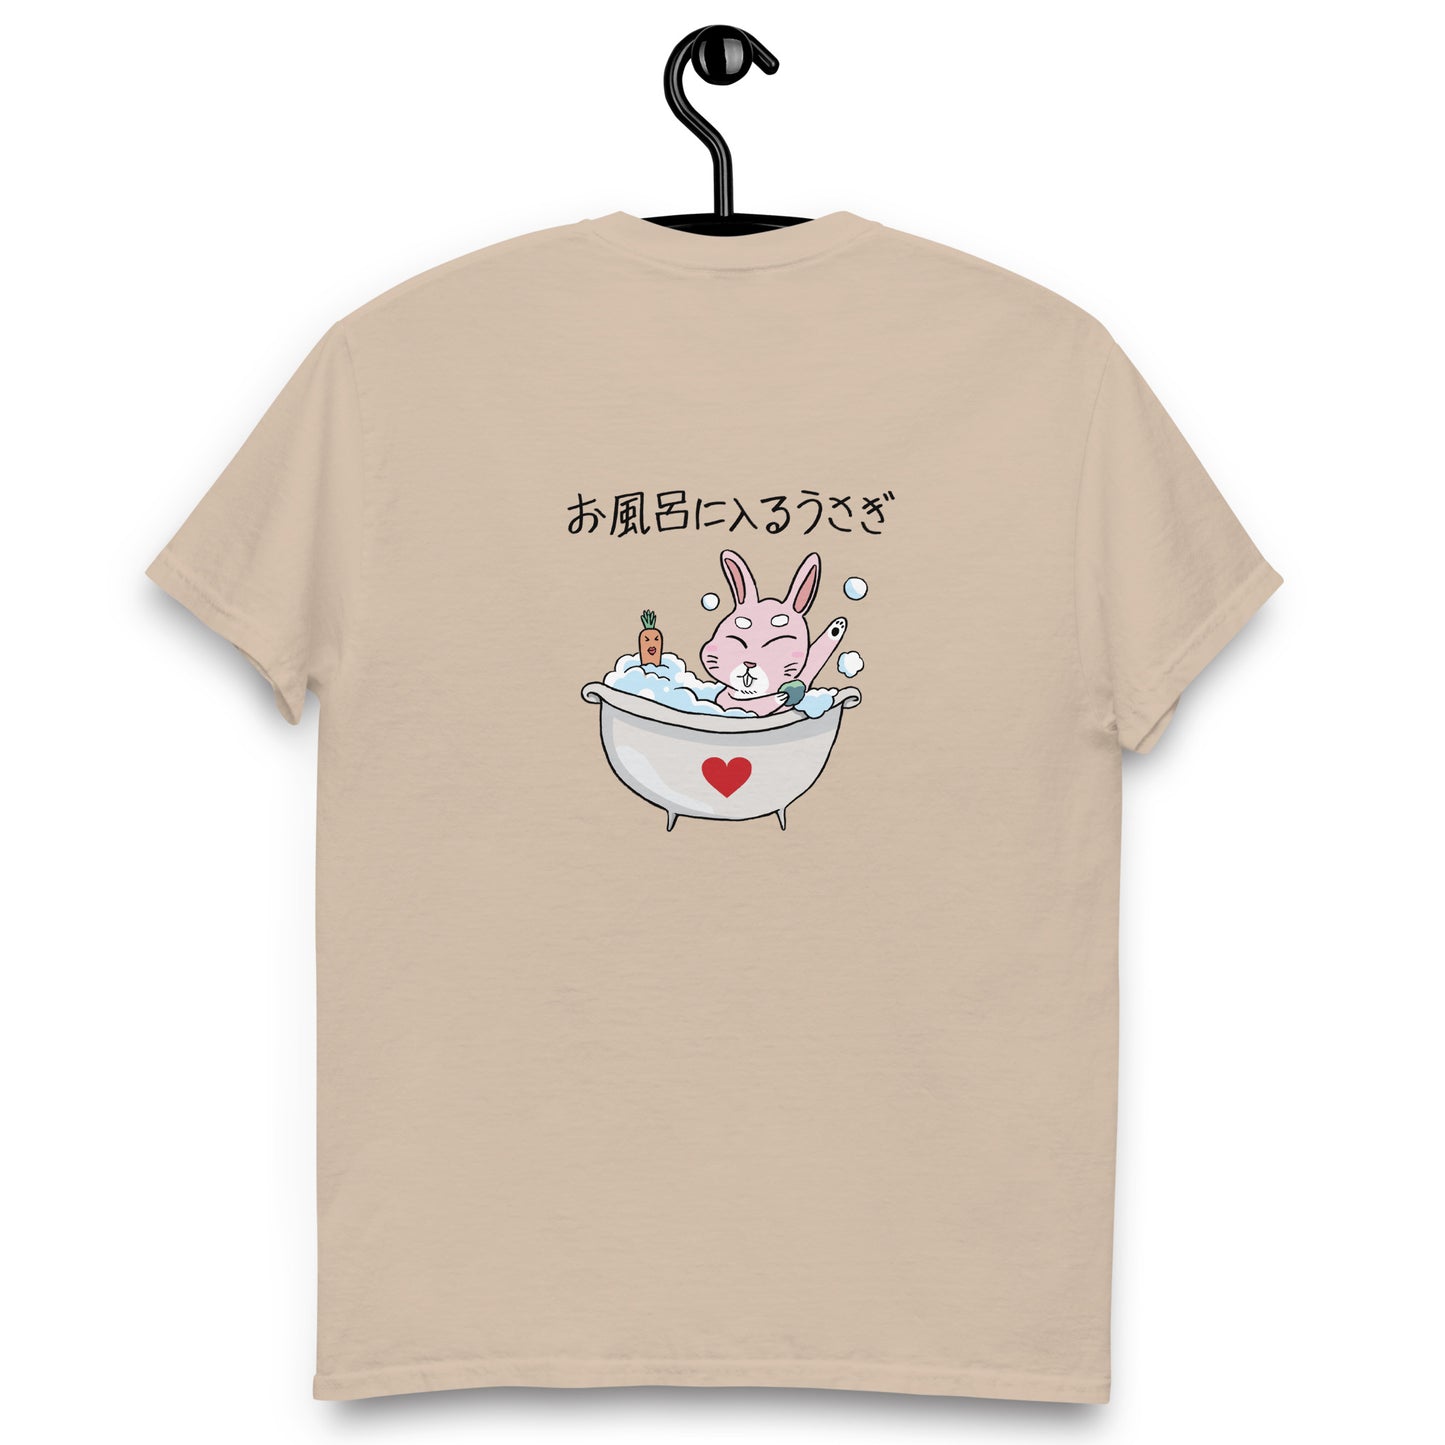 A Bathing Rabbit by tokyozoodesign Men's classic tee